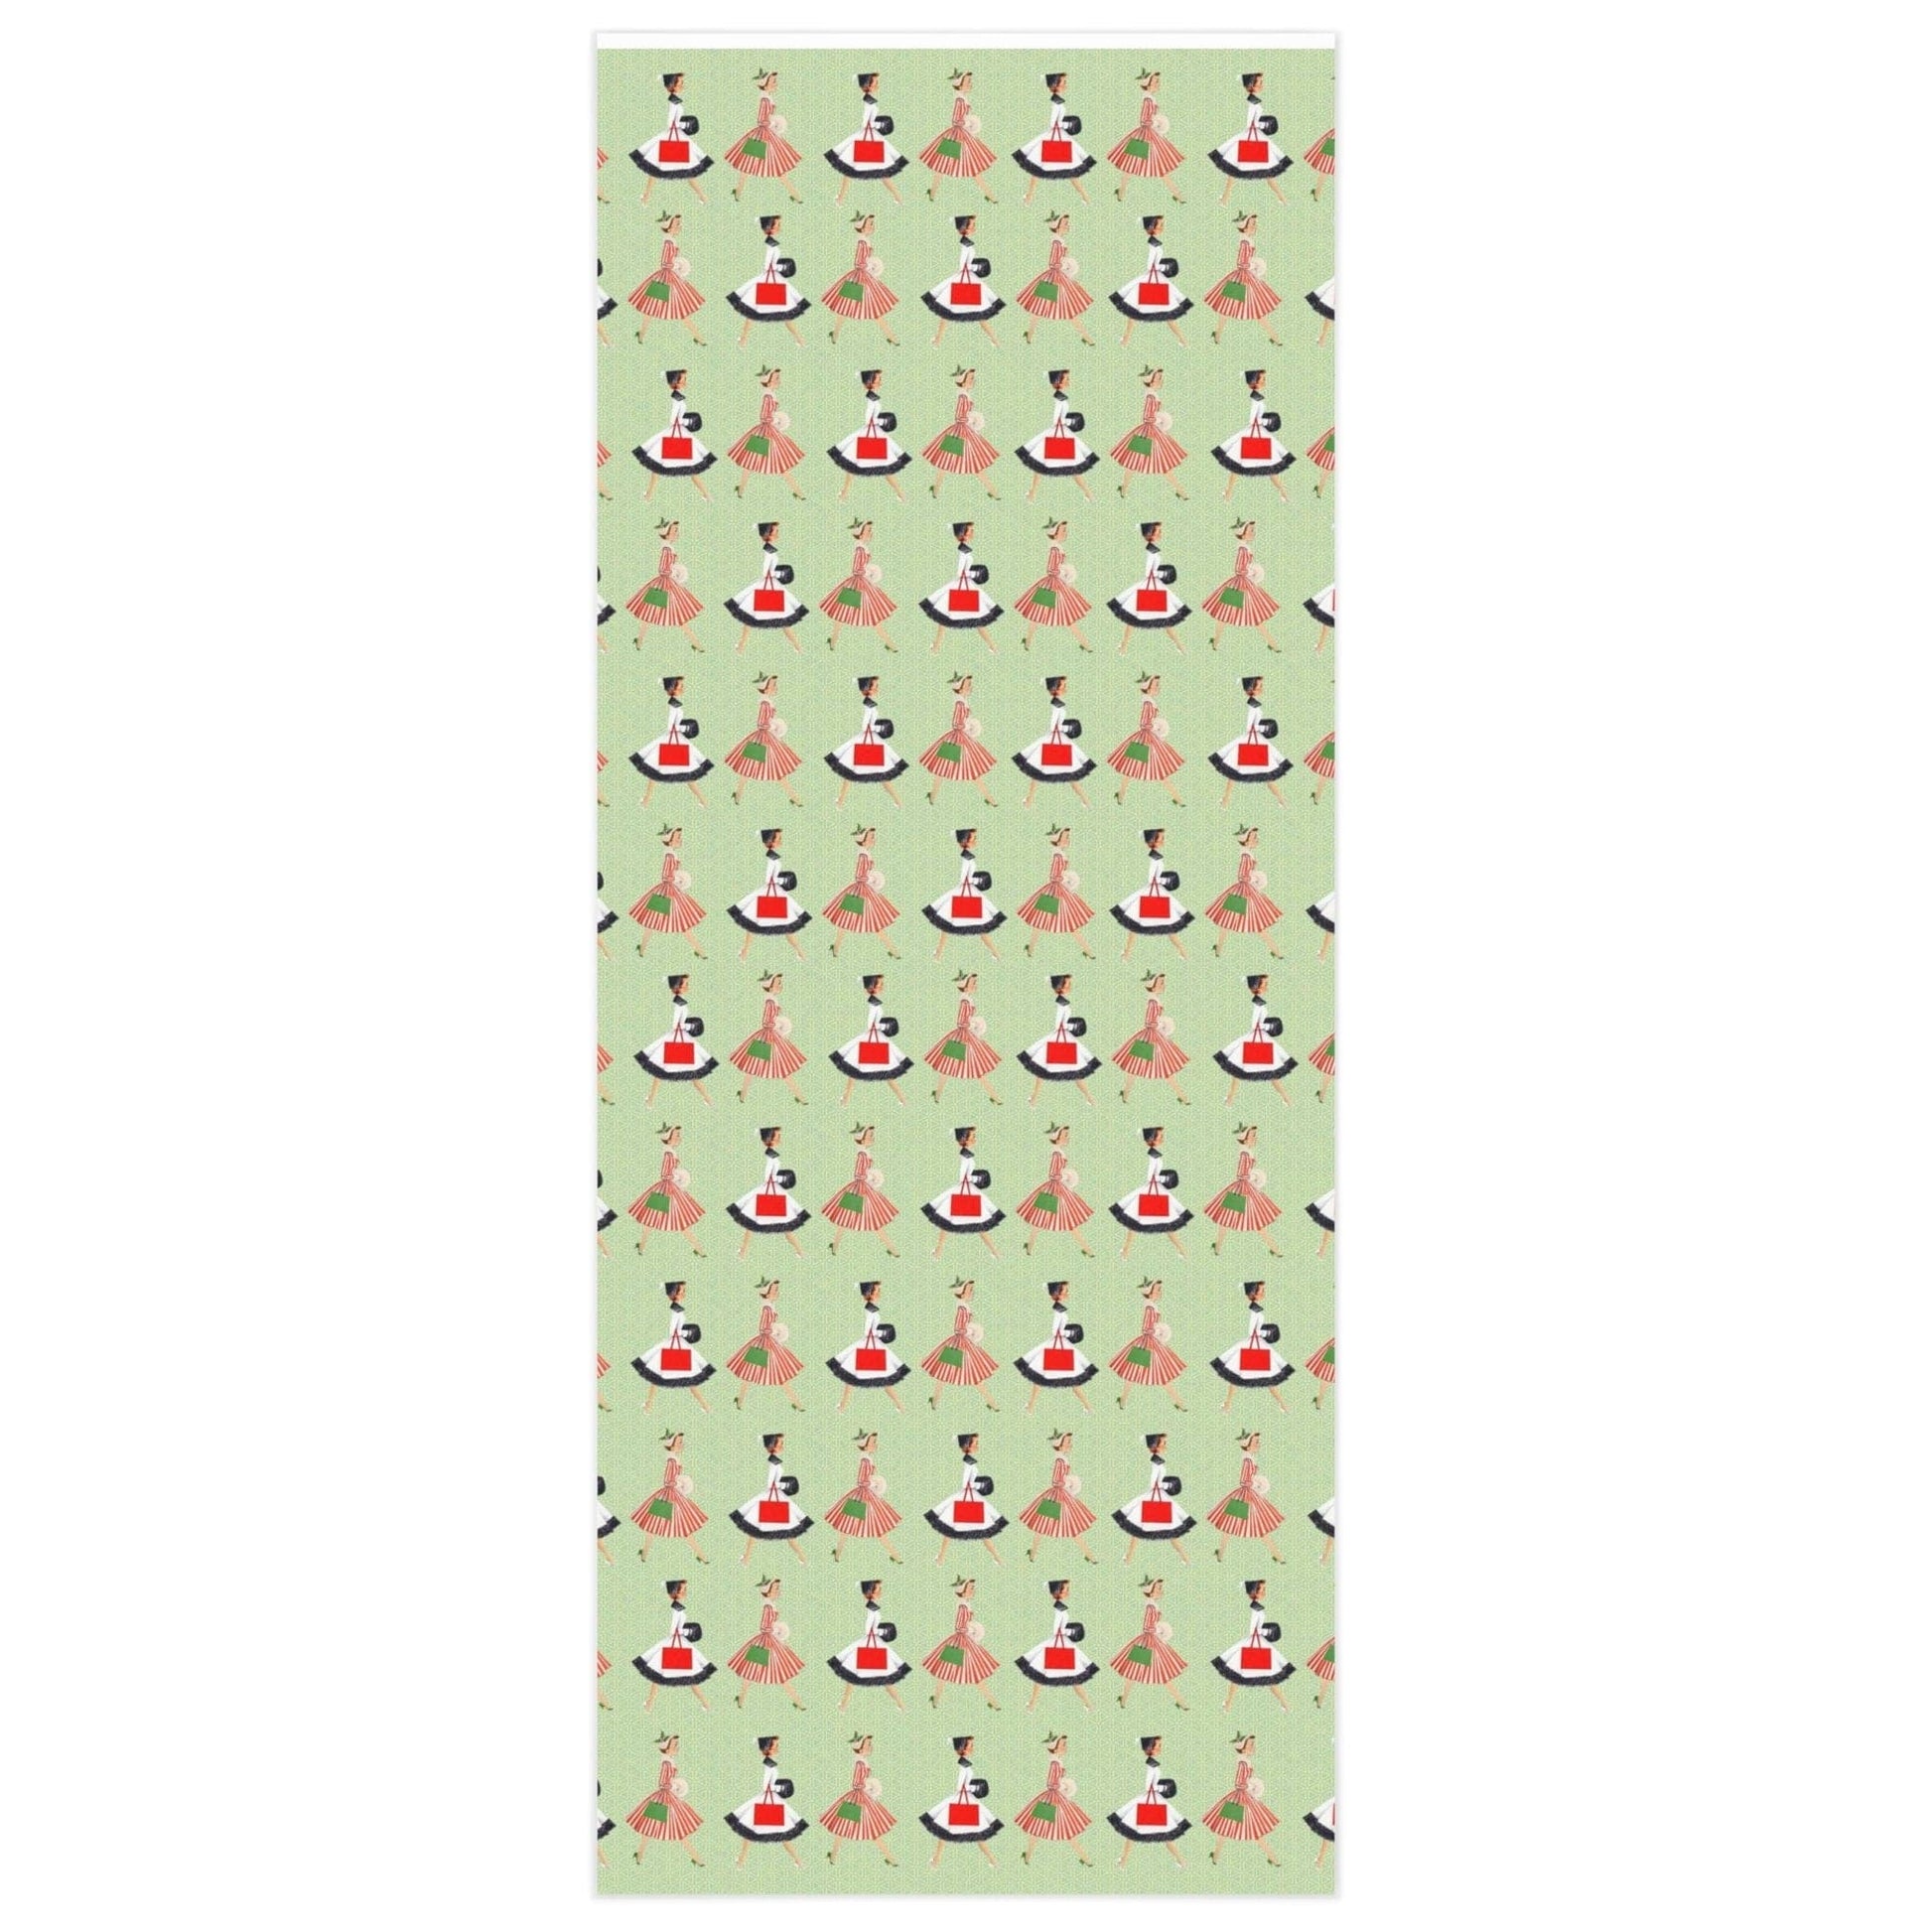 Retro Vintage 1950s Christmas Wrapping Paper, Mid Century Modern